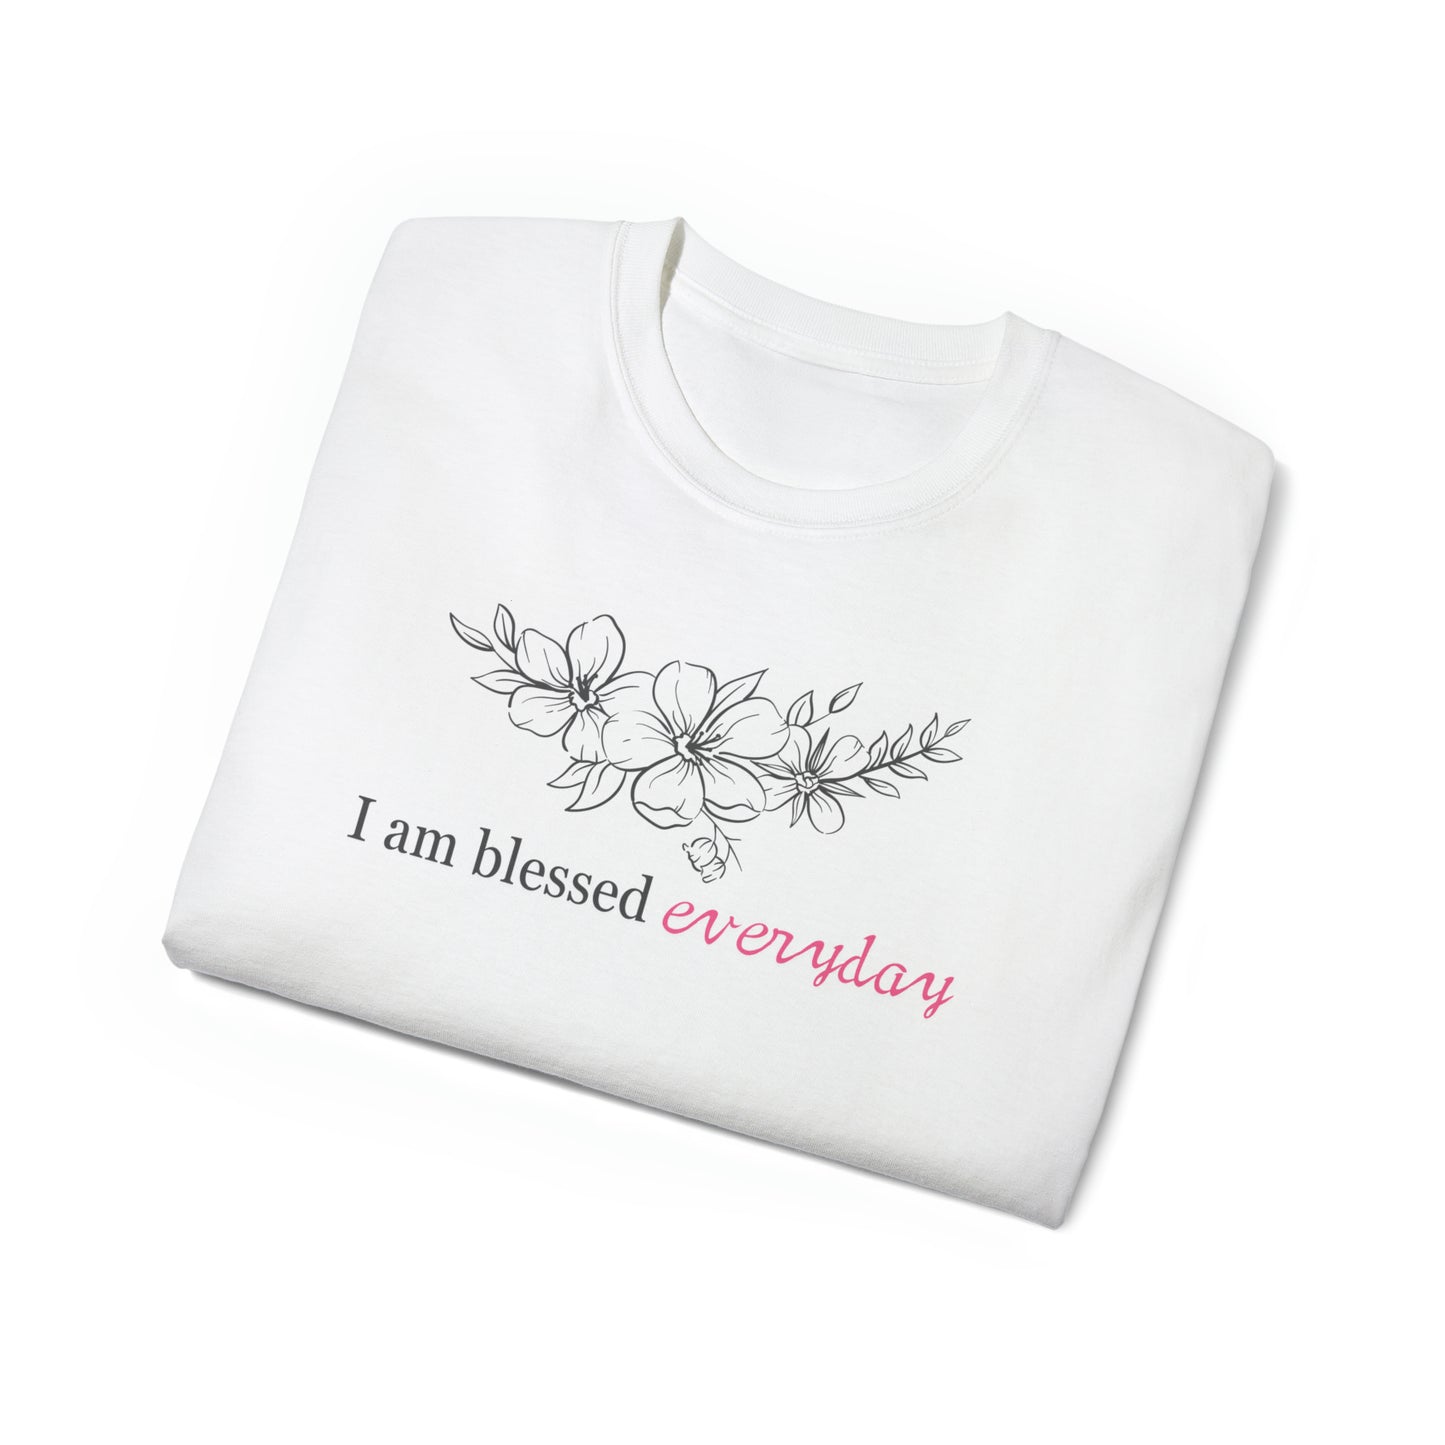 Unisex Ultra Cotton Tee - I am blessed everyday